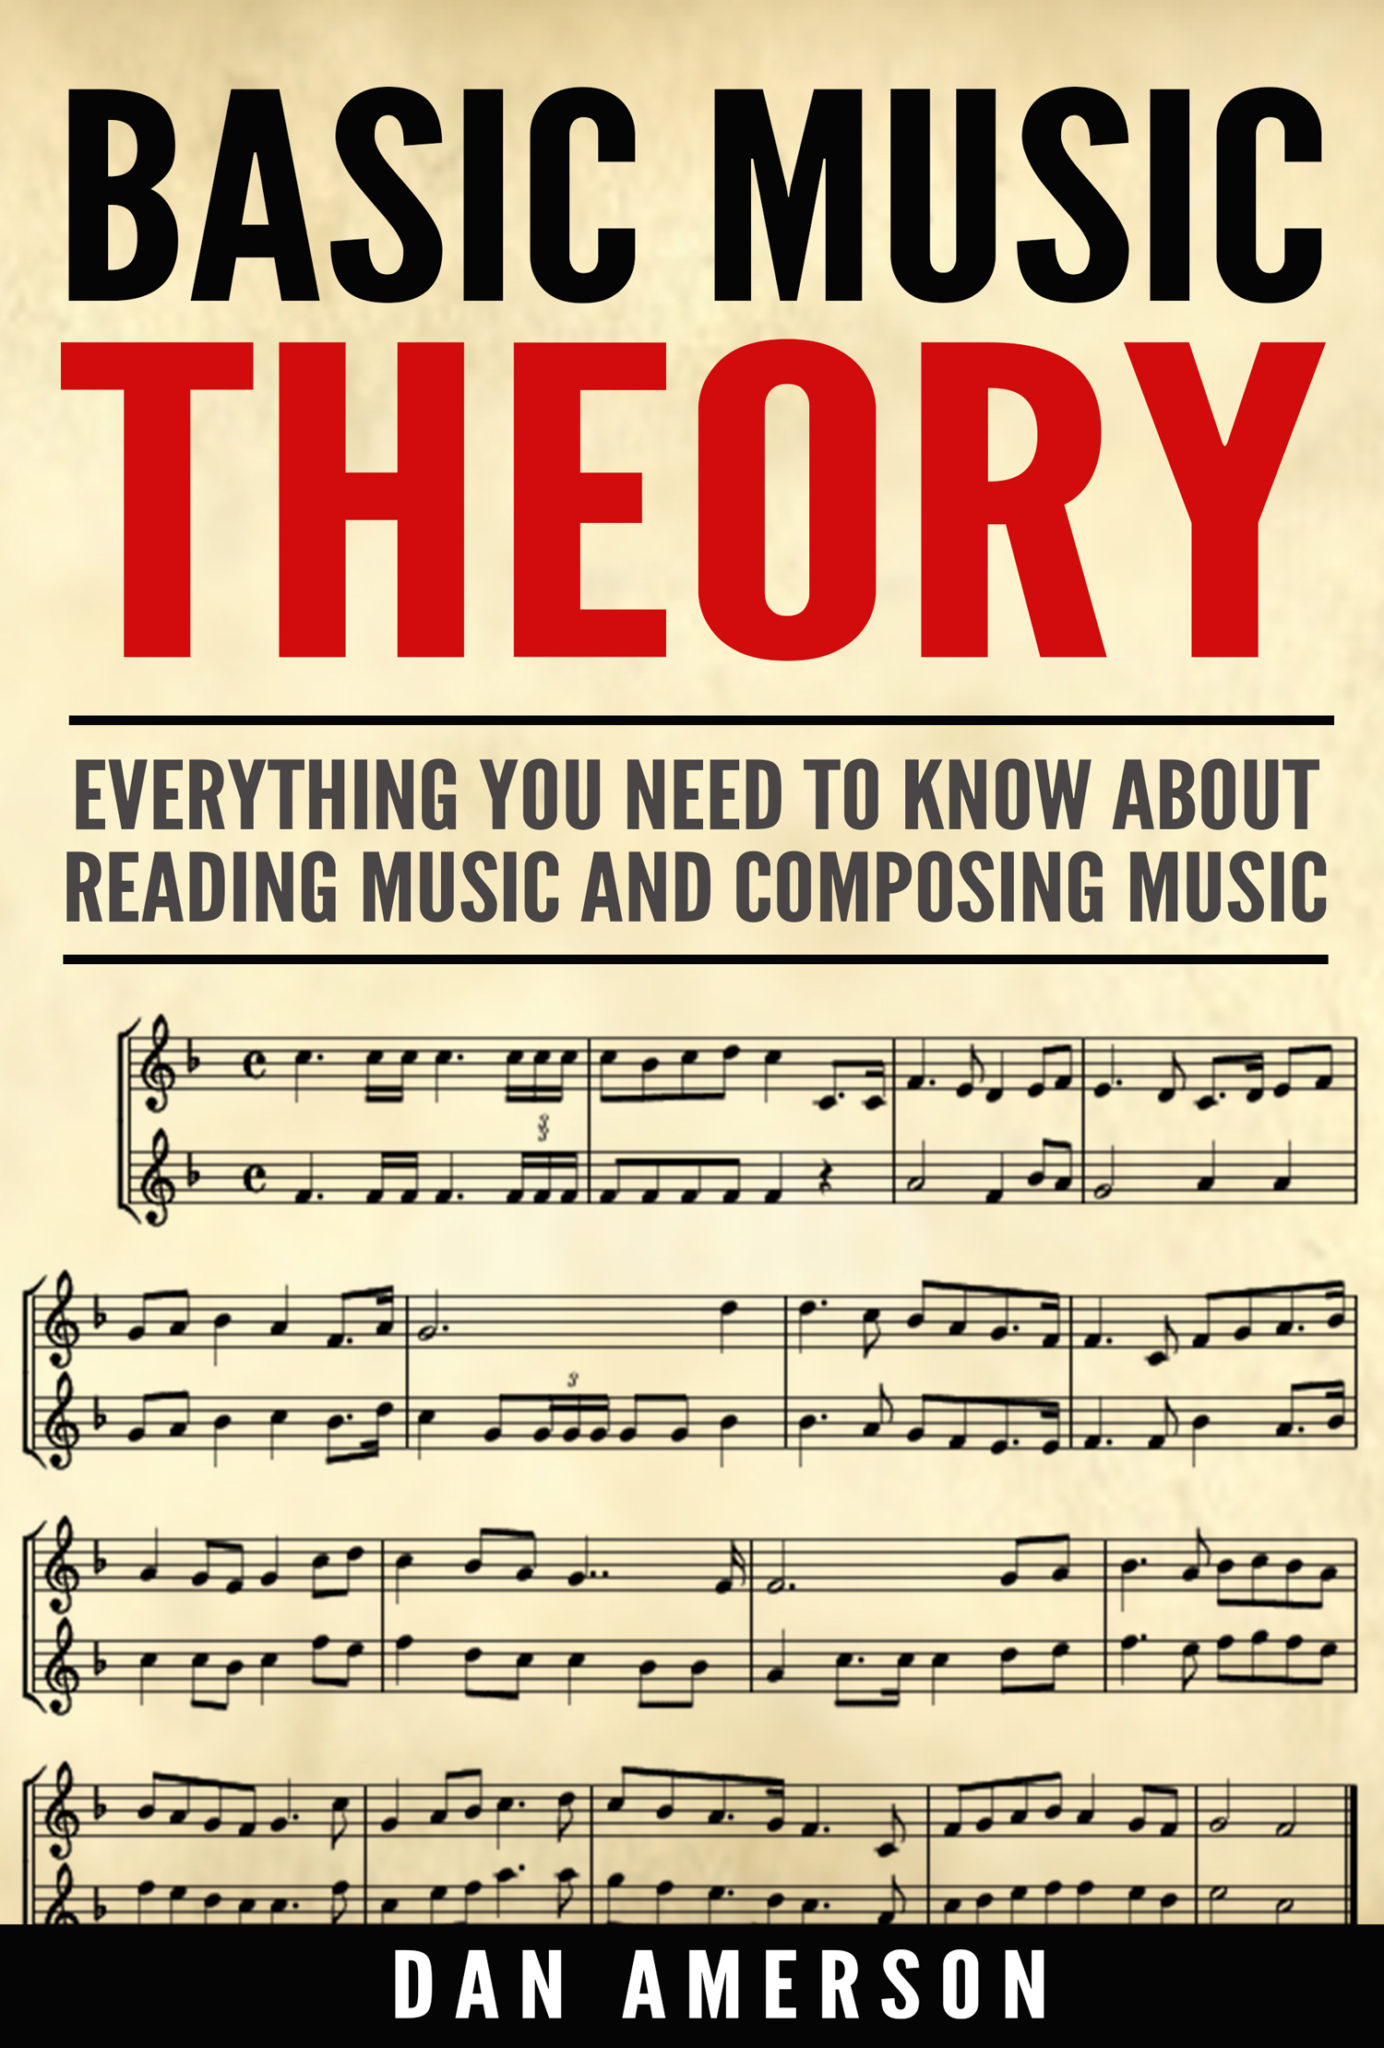 FREE: Basic Music Theory – Everything You Need to Know about Reading Music and Composing Music by Dan Amerson